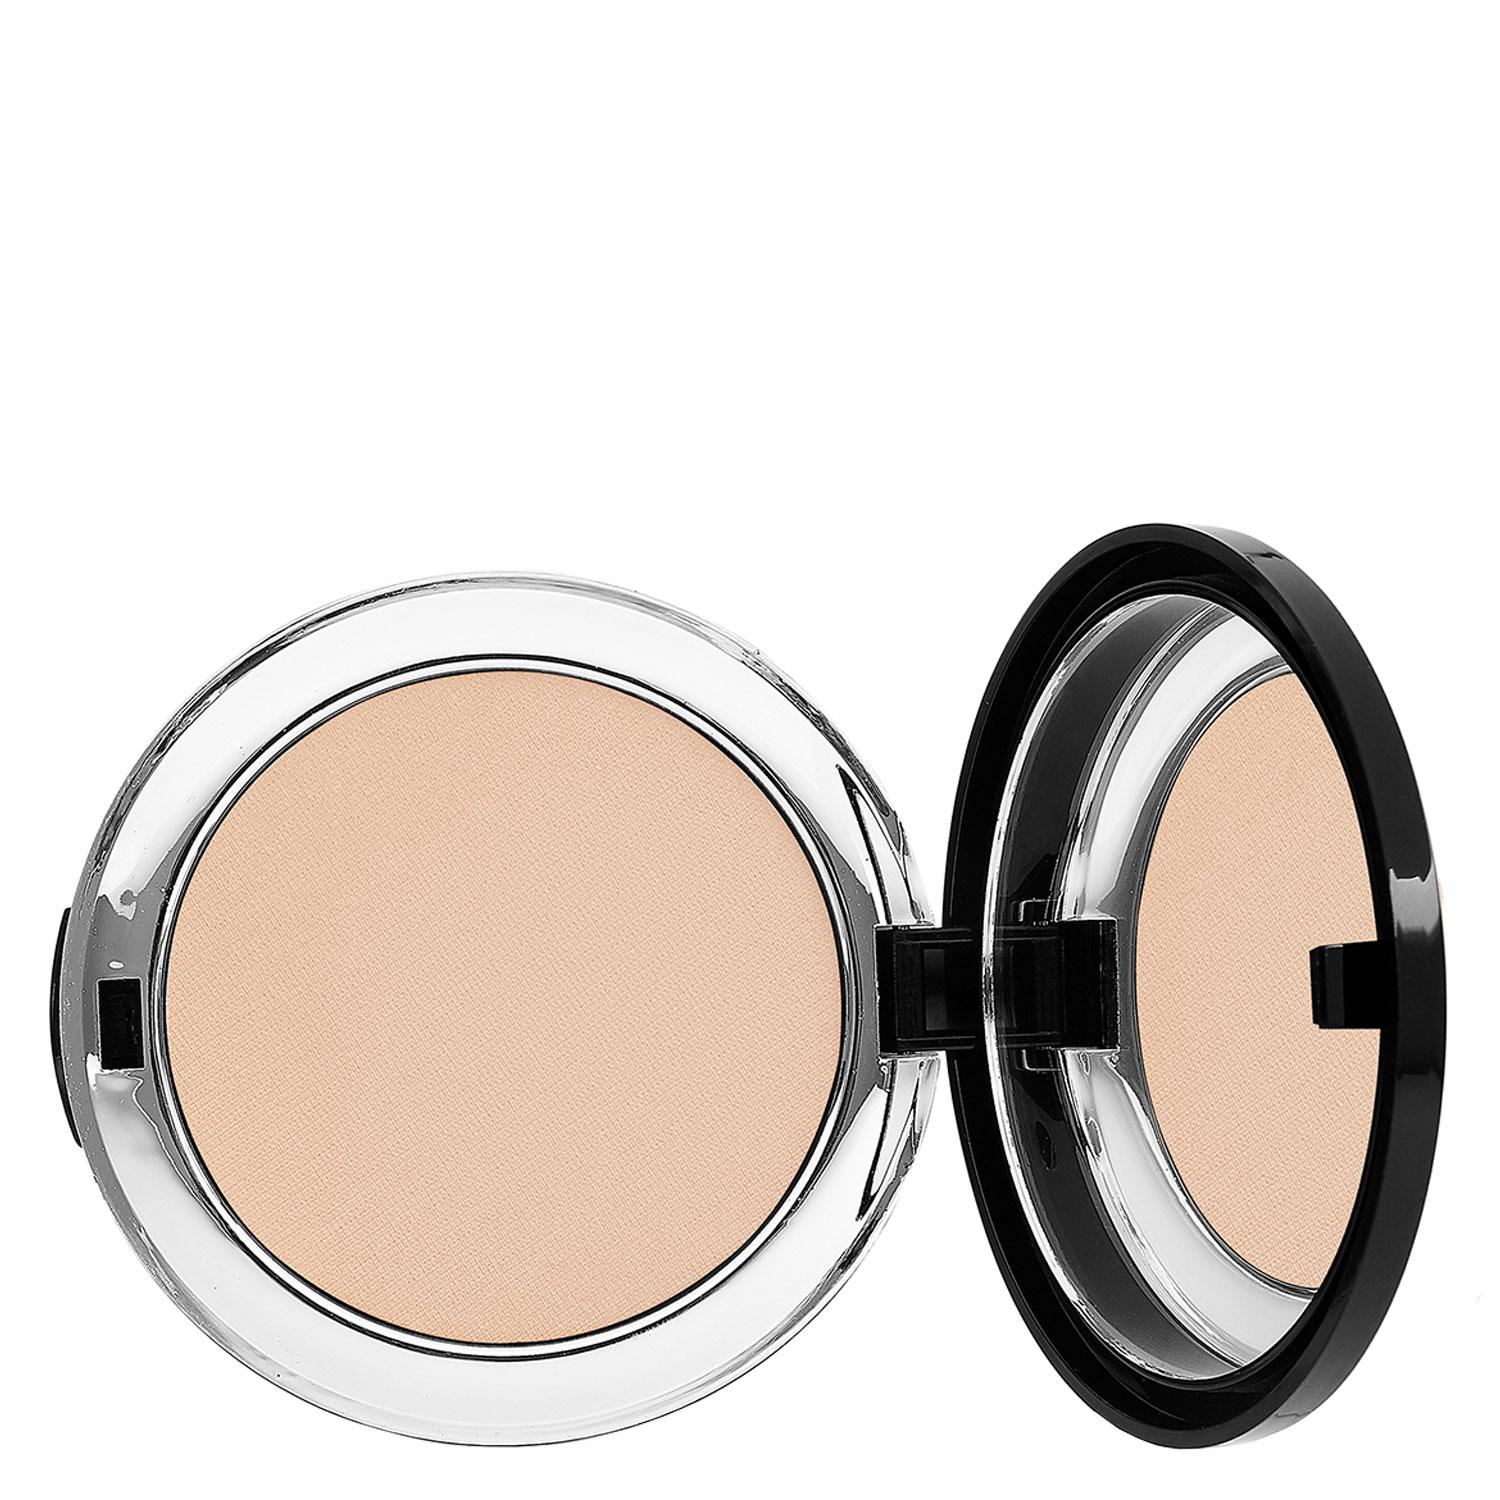 bellapierre Teint - Compact Mineral Foundation SPF15 Ivory